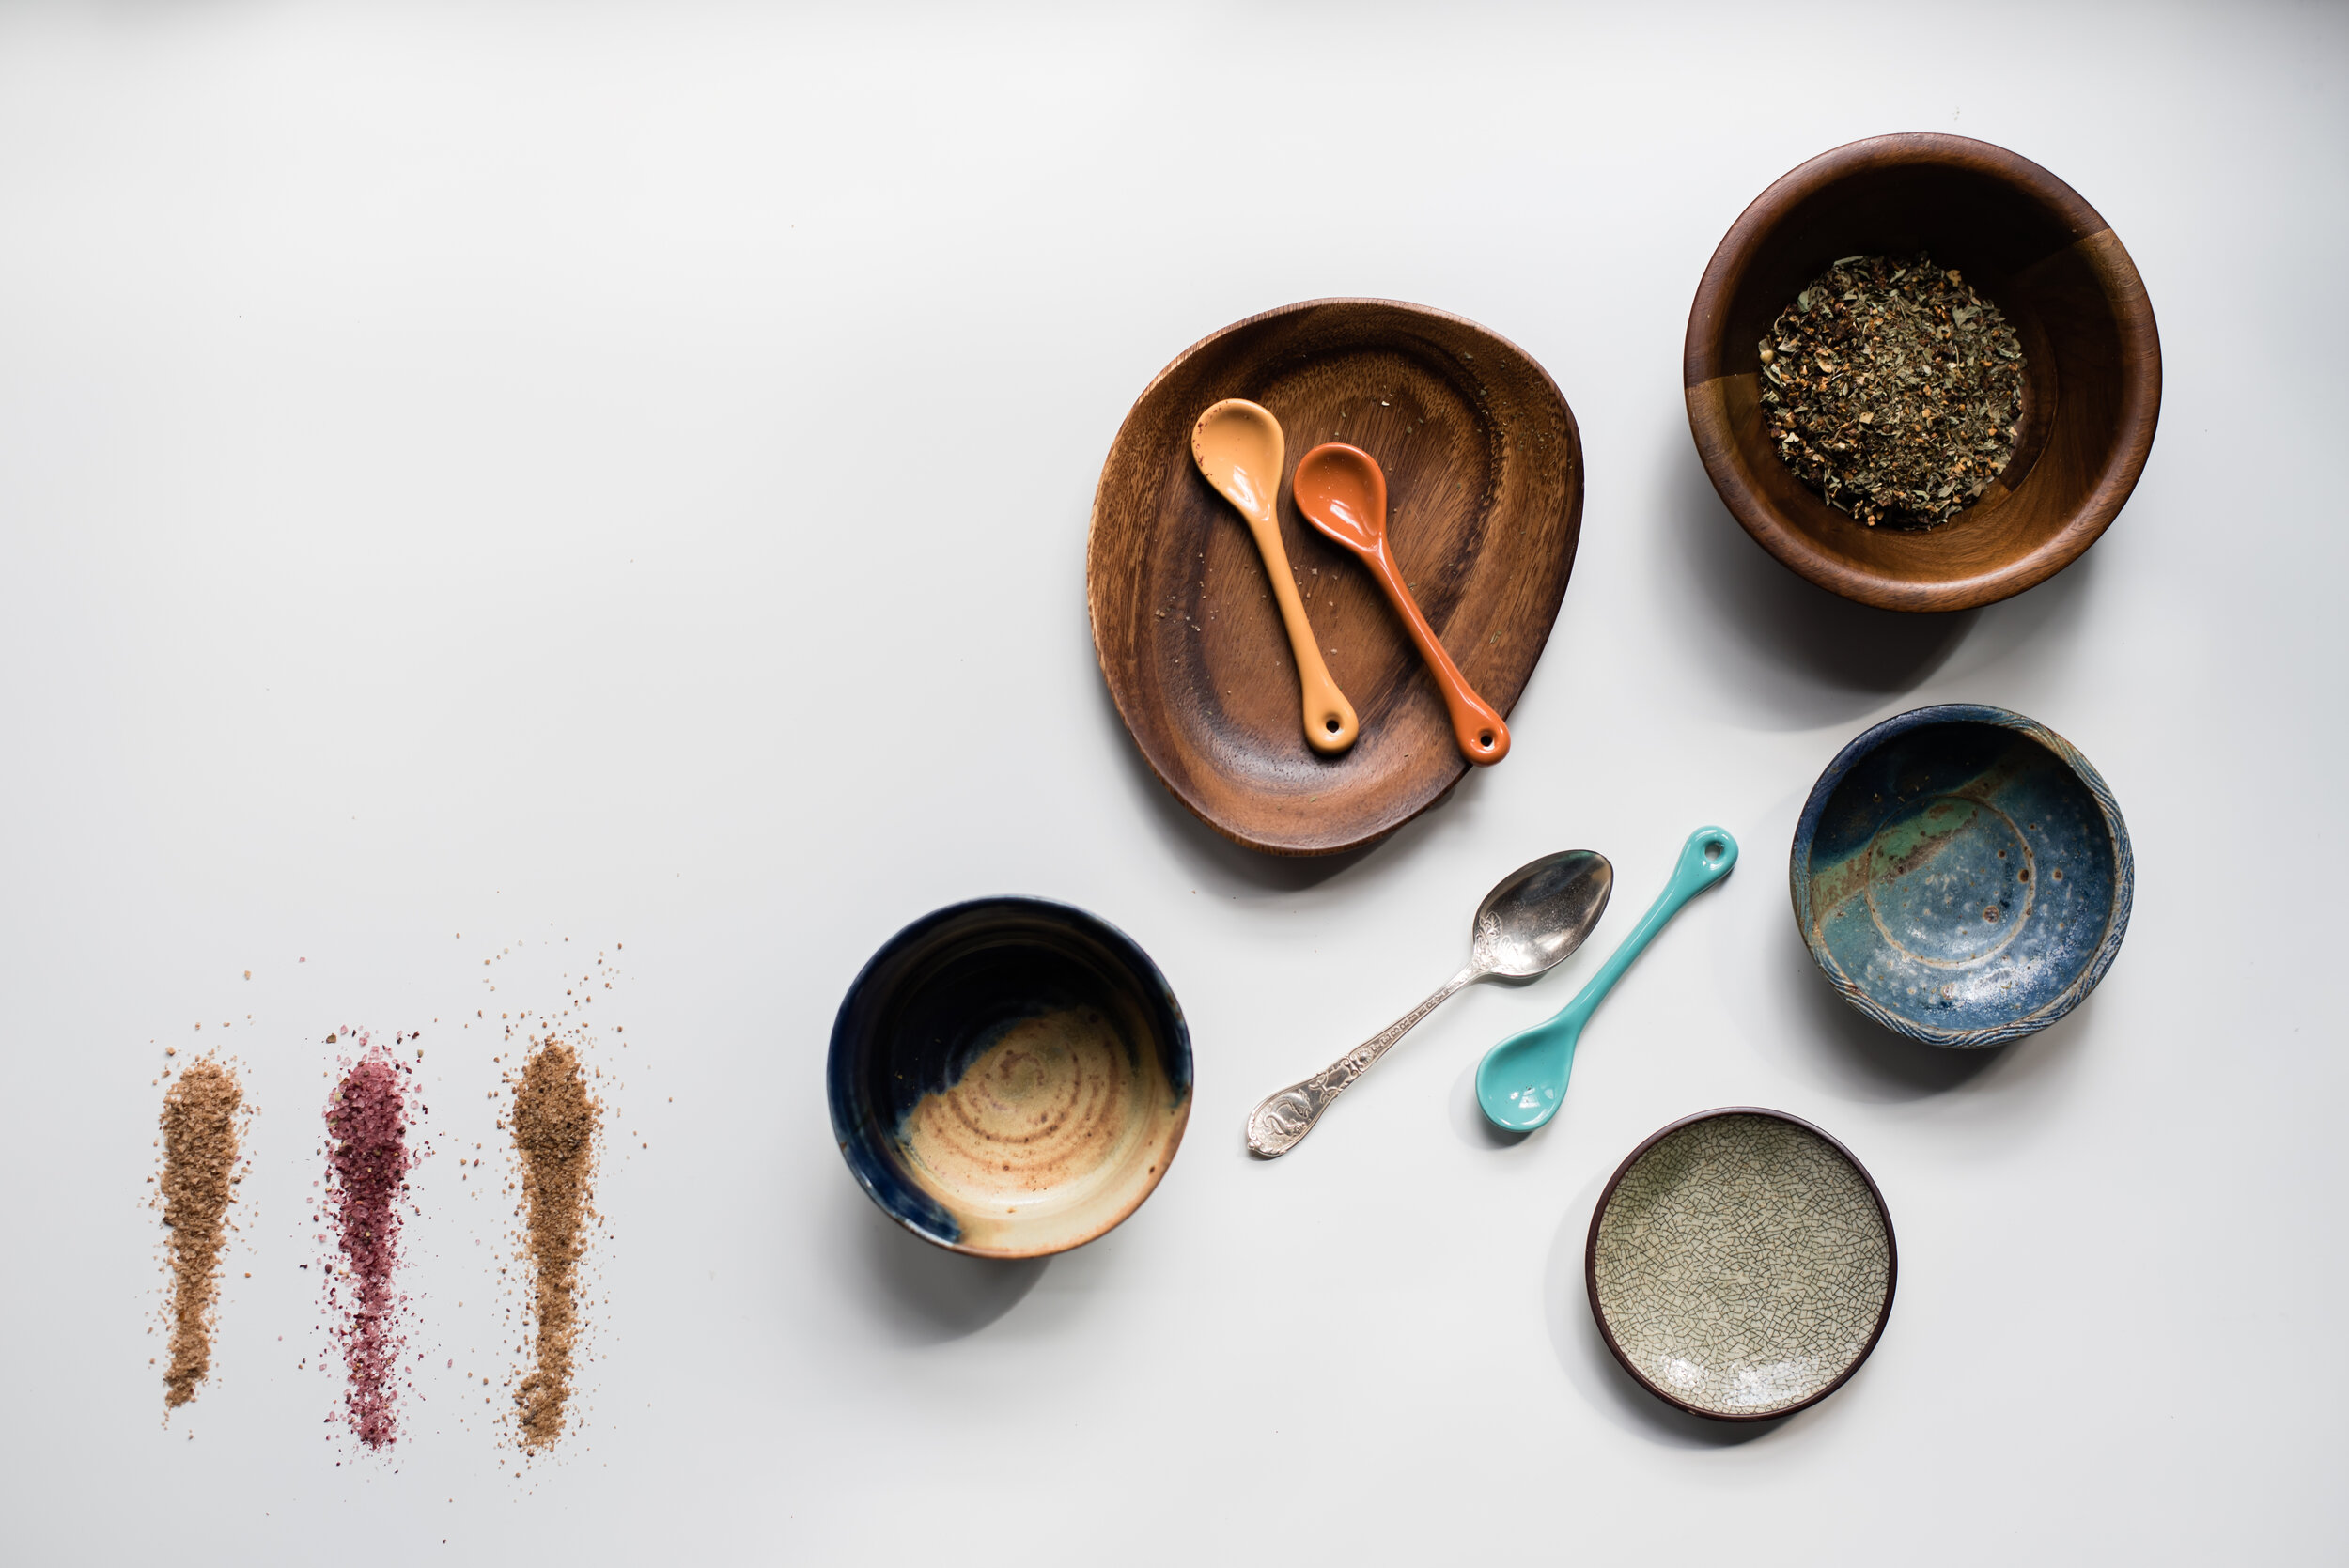 Studio photo of wooden bowls, spoons, and dried spices 